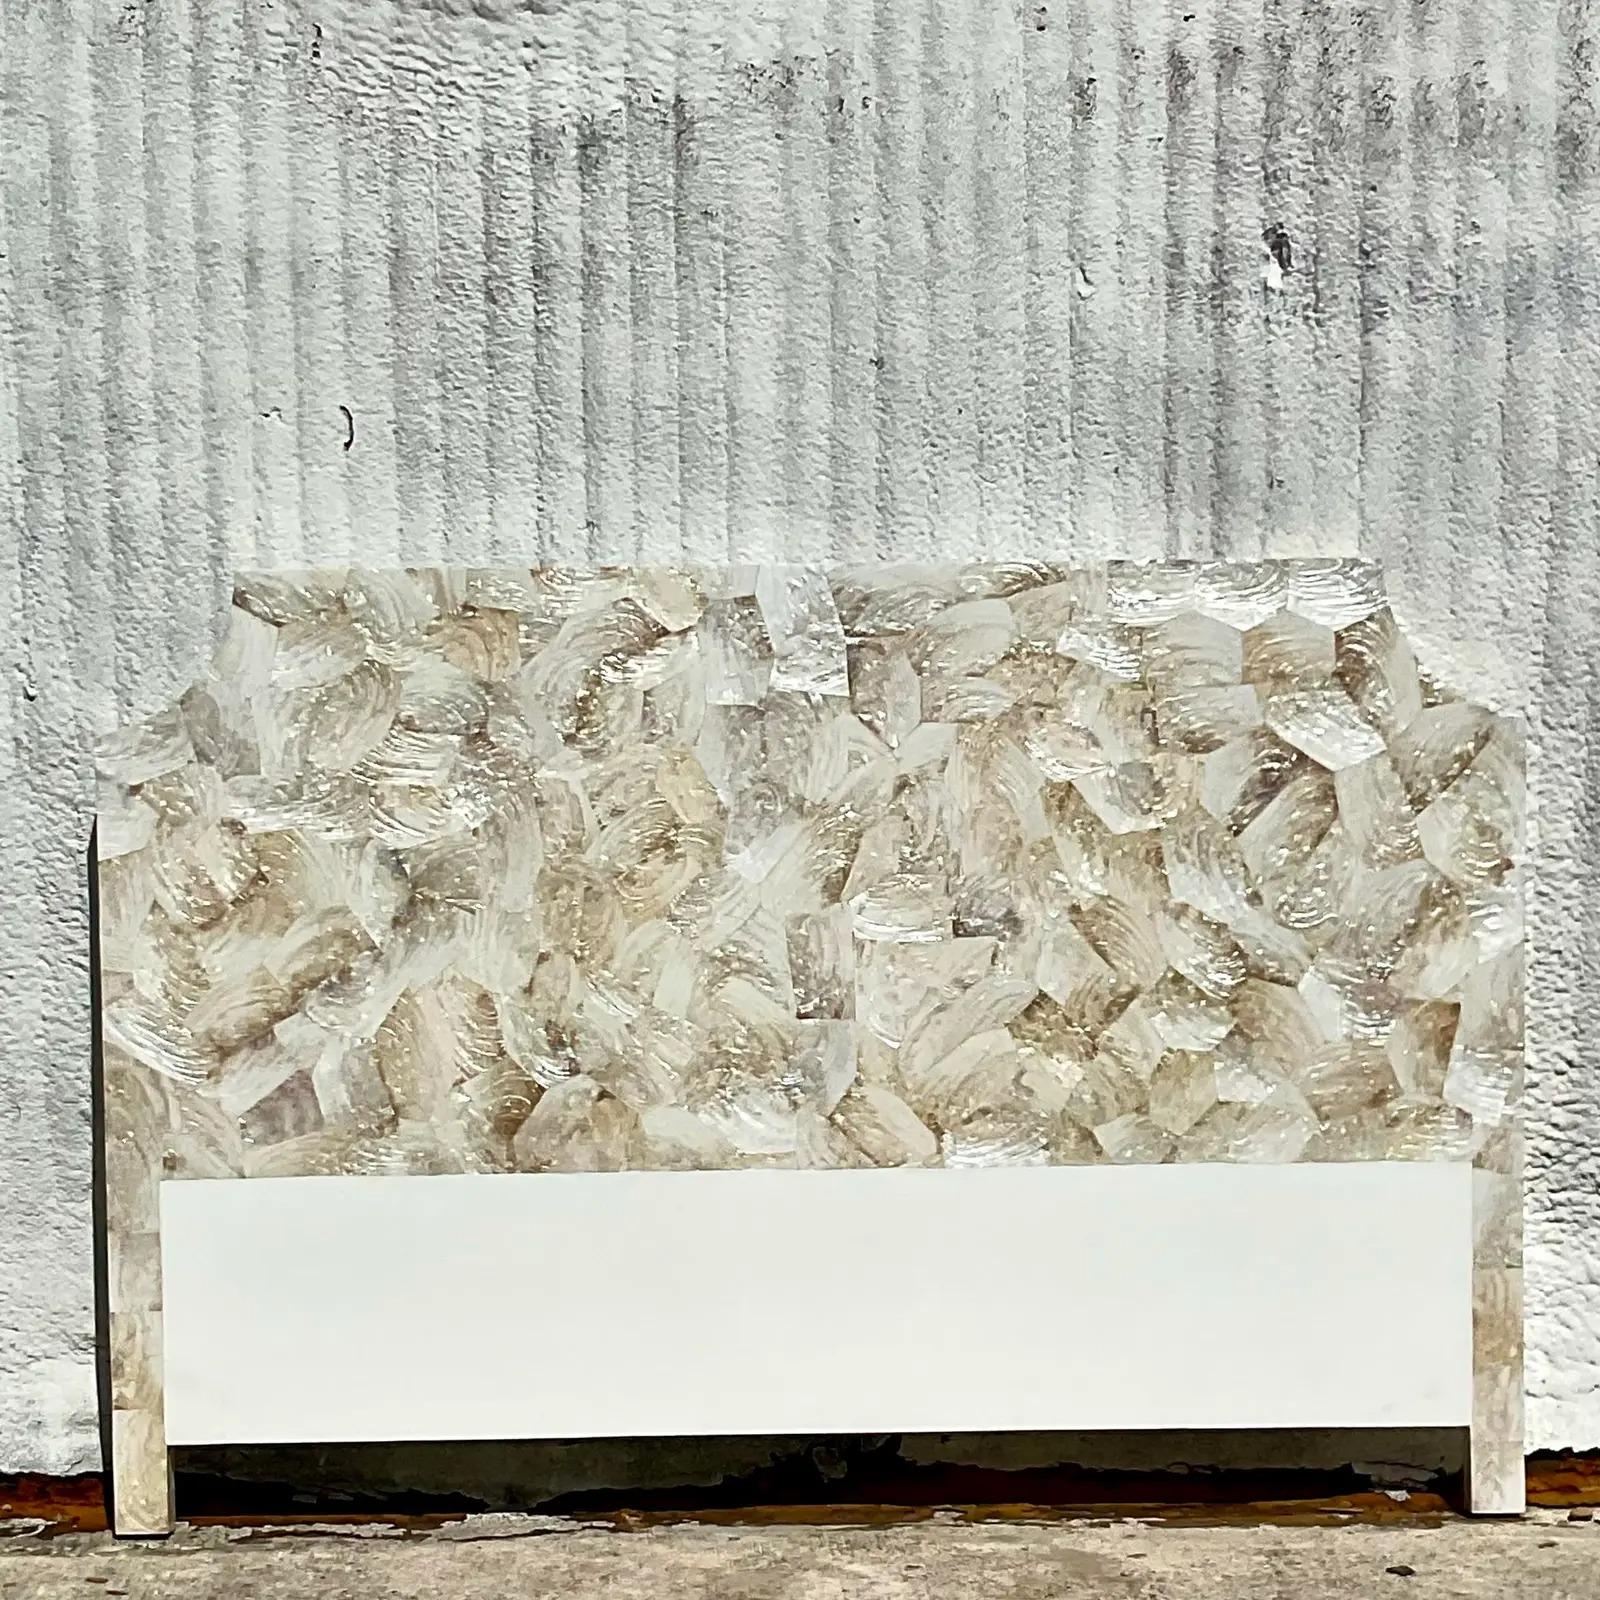 A spectacular vintage Coastal King headboard. The “Gabrielle” style made from the coveted Kabibe Shell in a chic notched corner design. Acquired from a Singer Island estate.